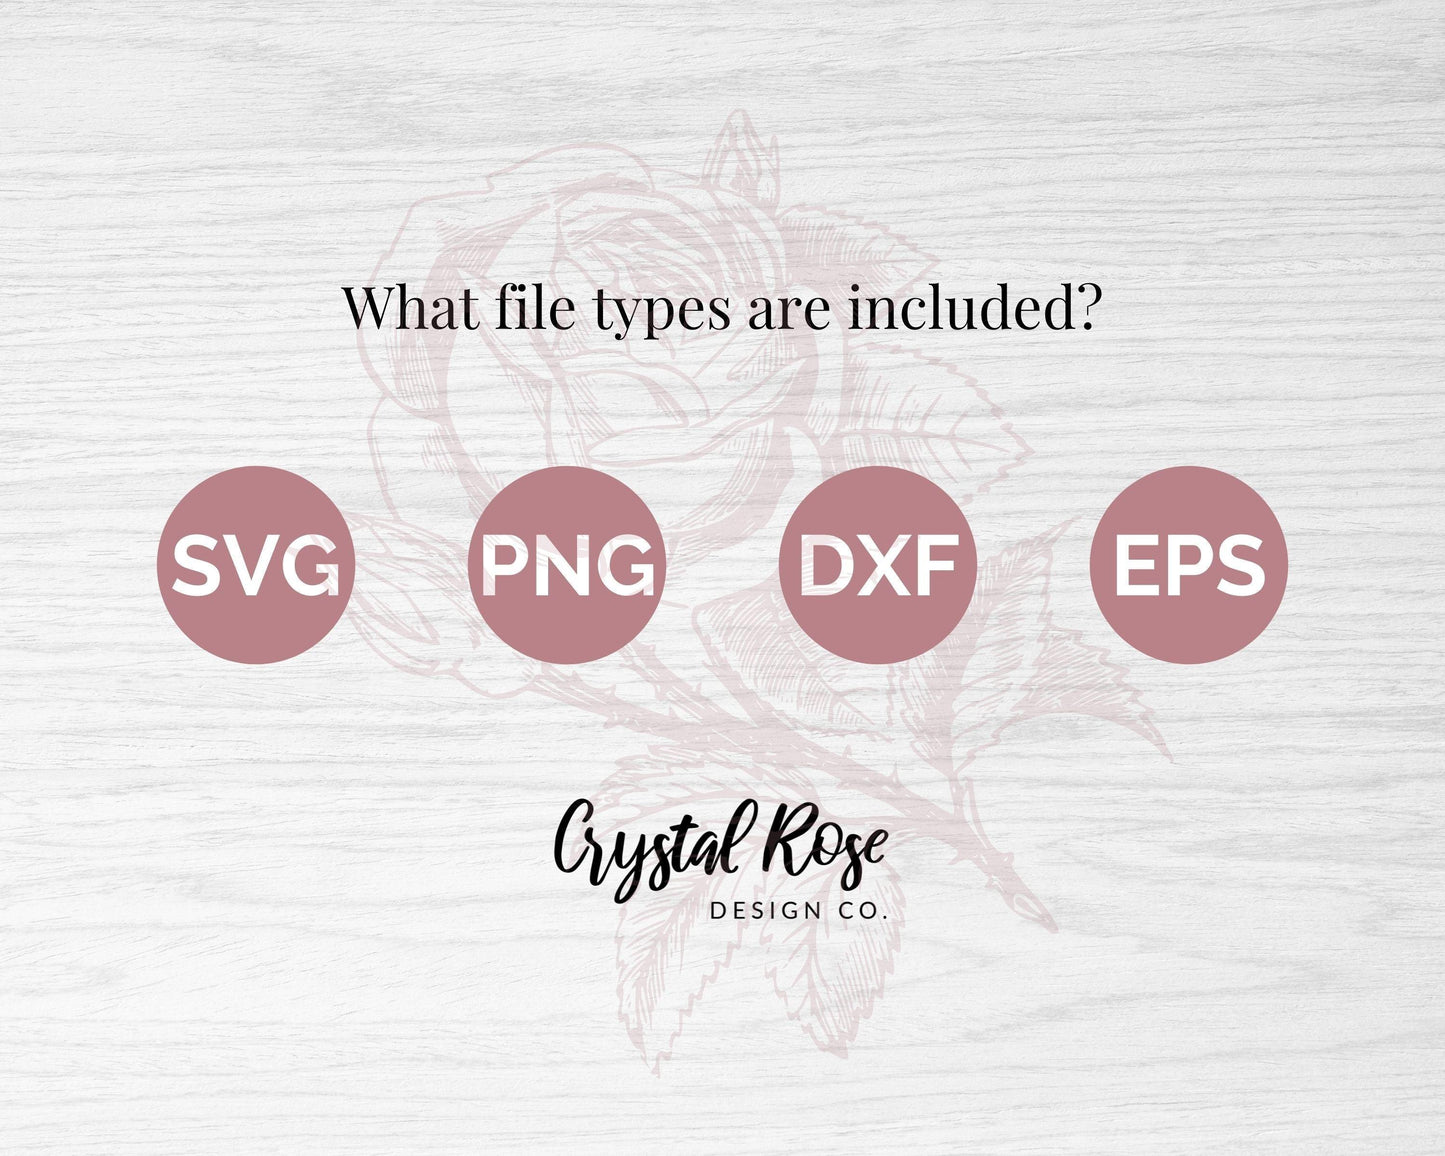 Retro Focus On The Good SVG, Inspirational SVG, Digital Download, Cricut, Silhouette, Glowforge (includes svg/png/dxf/eps)